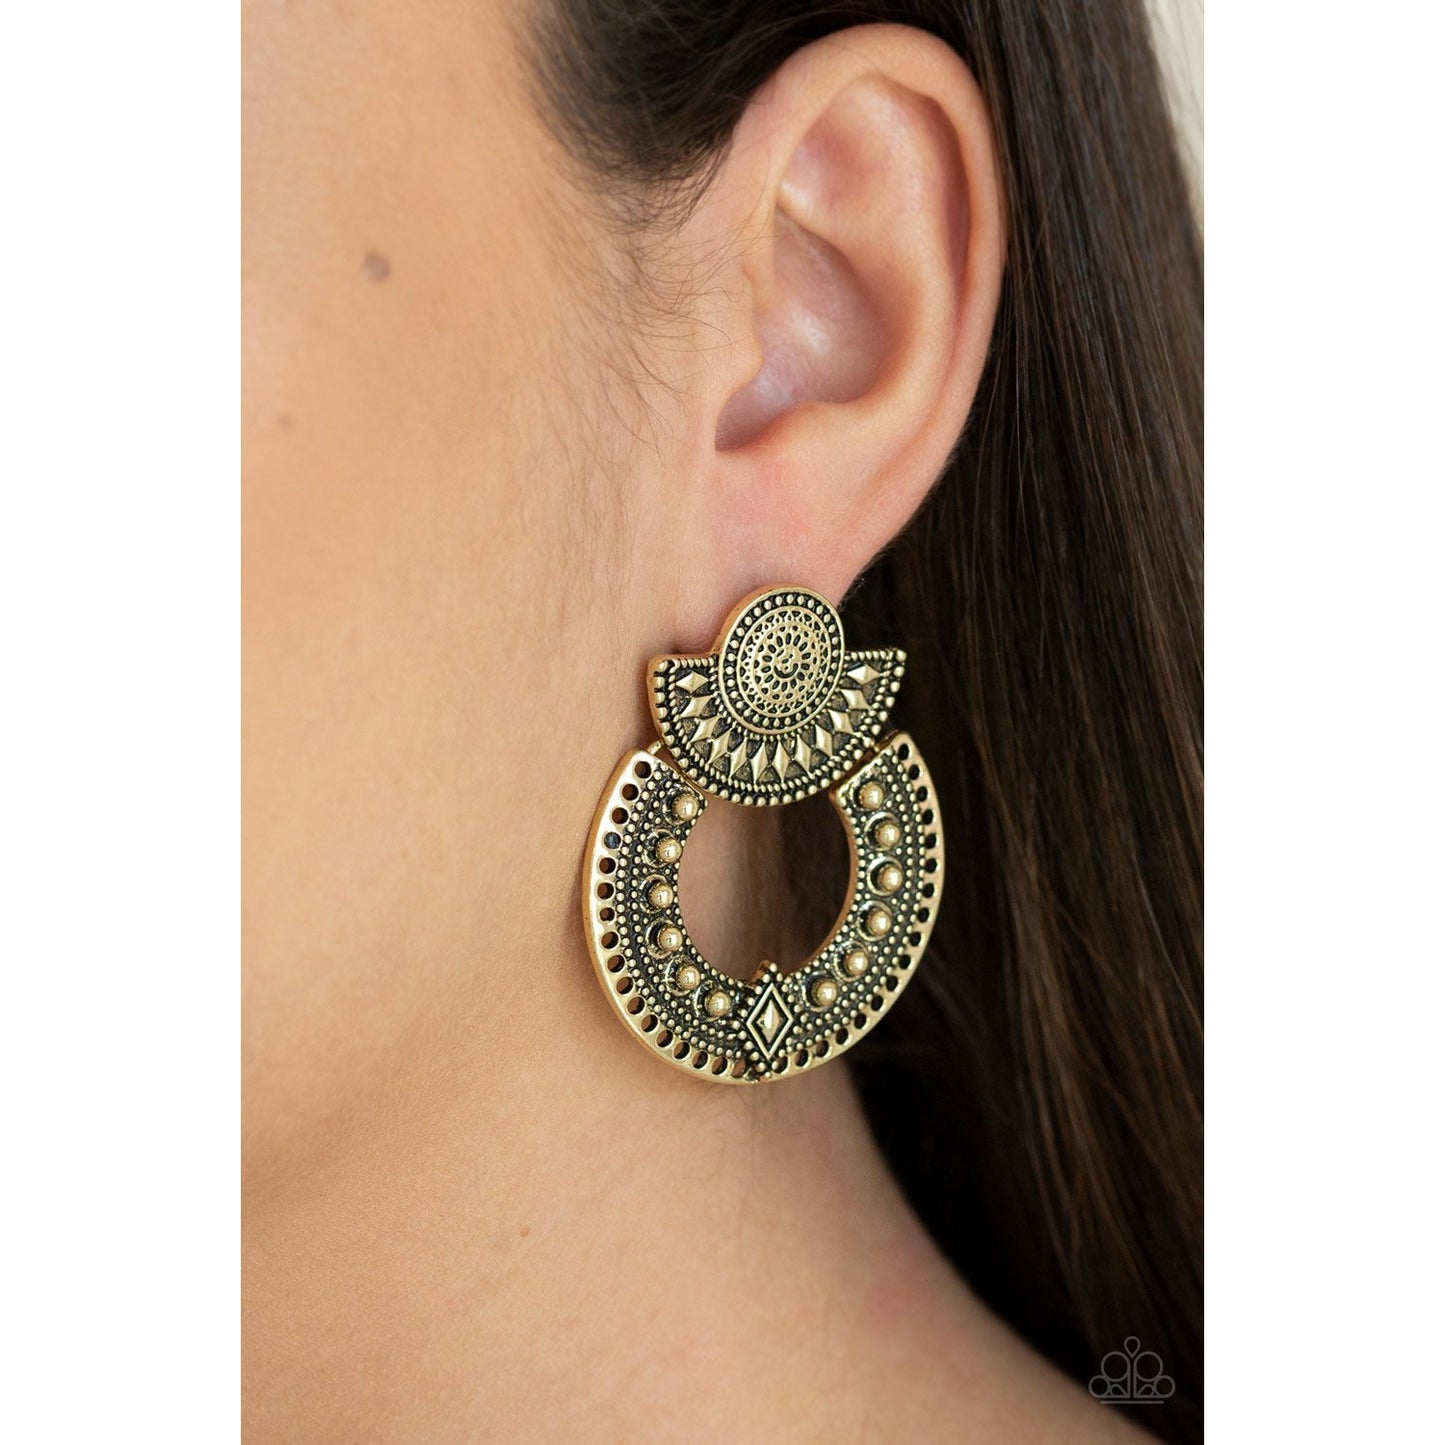 Texture Takeover - Brass earrings